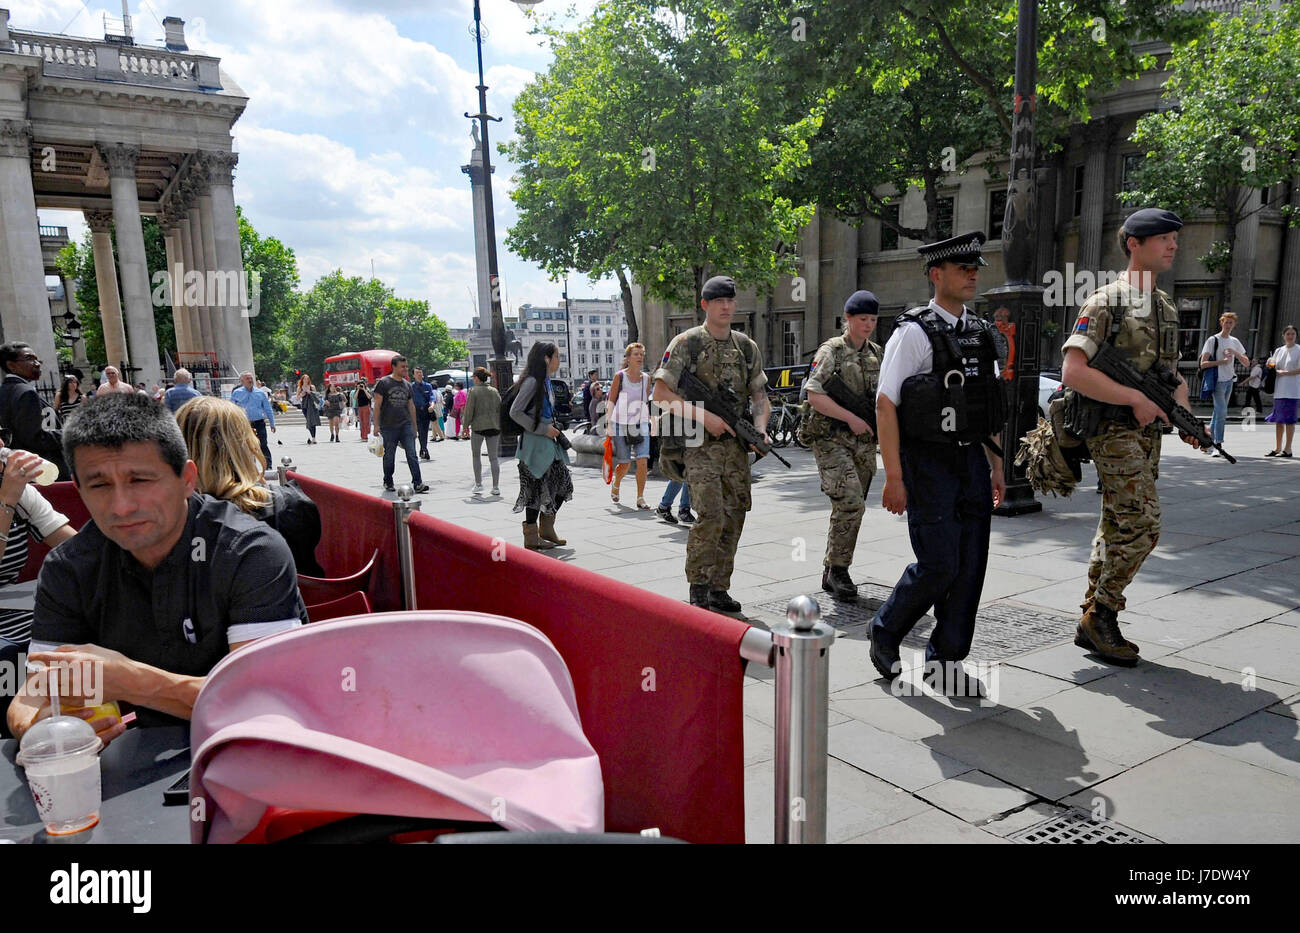 Members of the army join police officers on Whitehall, London, after Scotland Yard announced armed troops will be deployed to guard "key locations" such as Buckingham Palace, Downing Street, the Palace of Westminster and embassies. Stock Photo